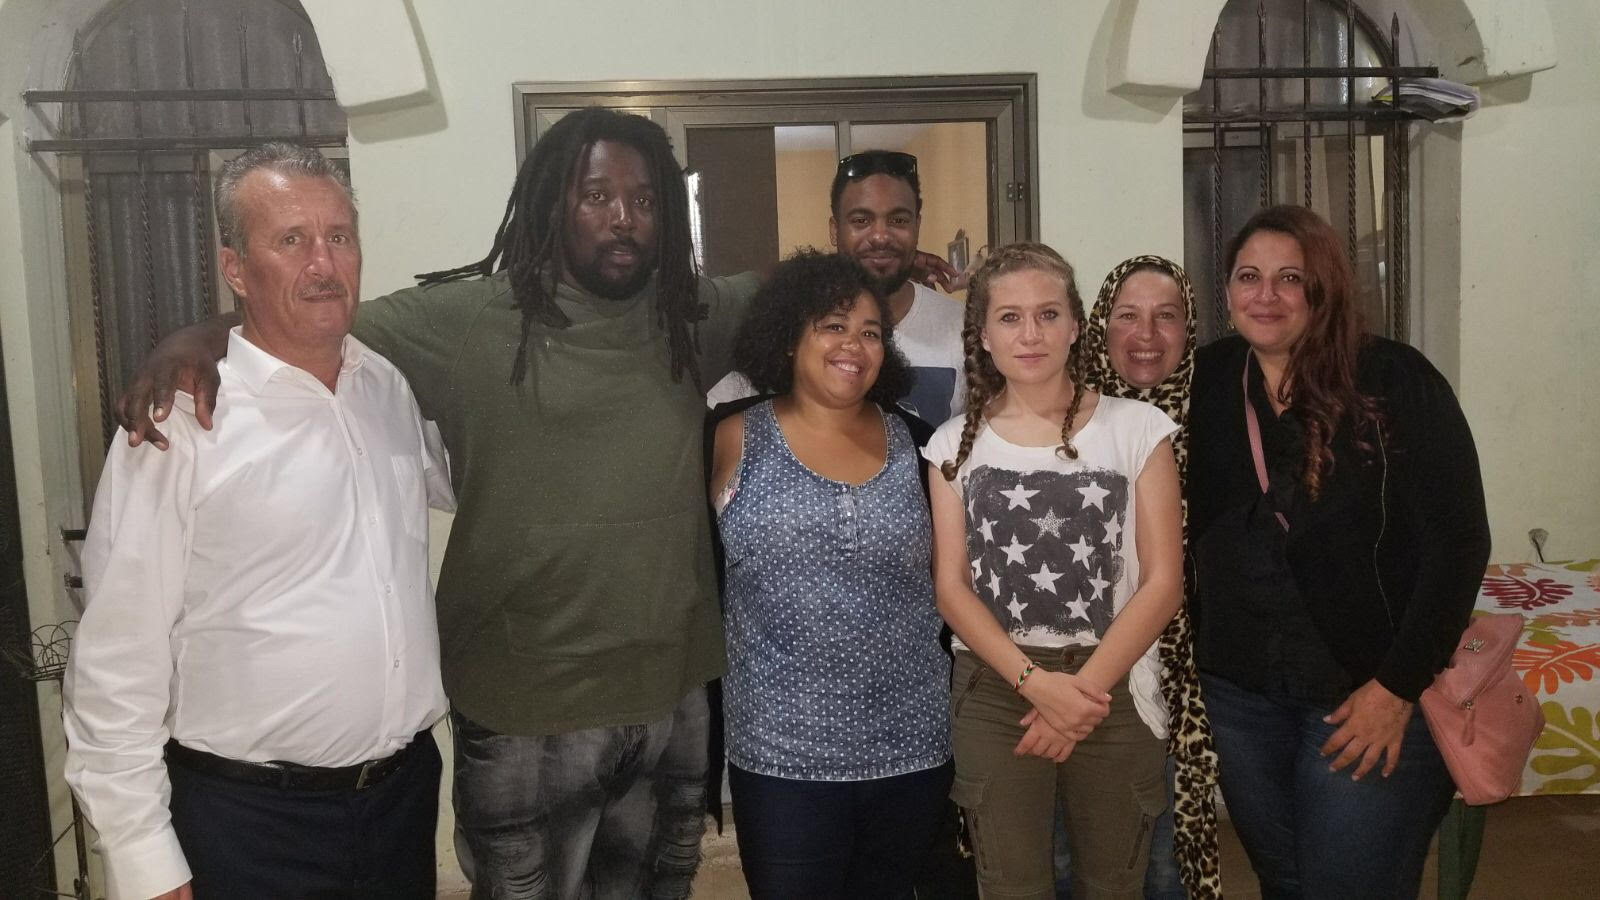 Photo: Author at center front center, next to Ahed. She is with the Tamimi family and other members of solidarity delegation.